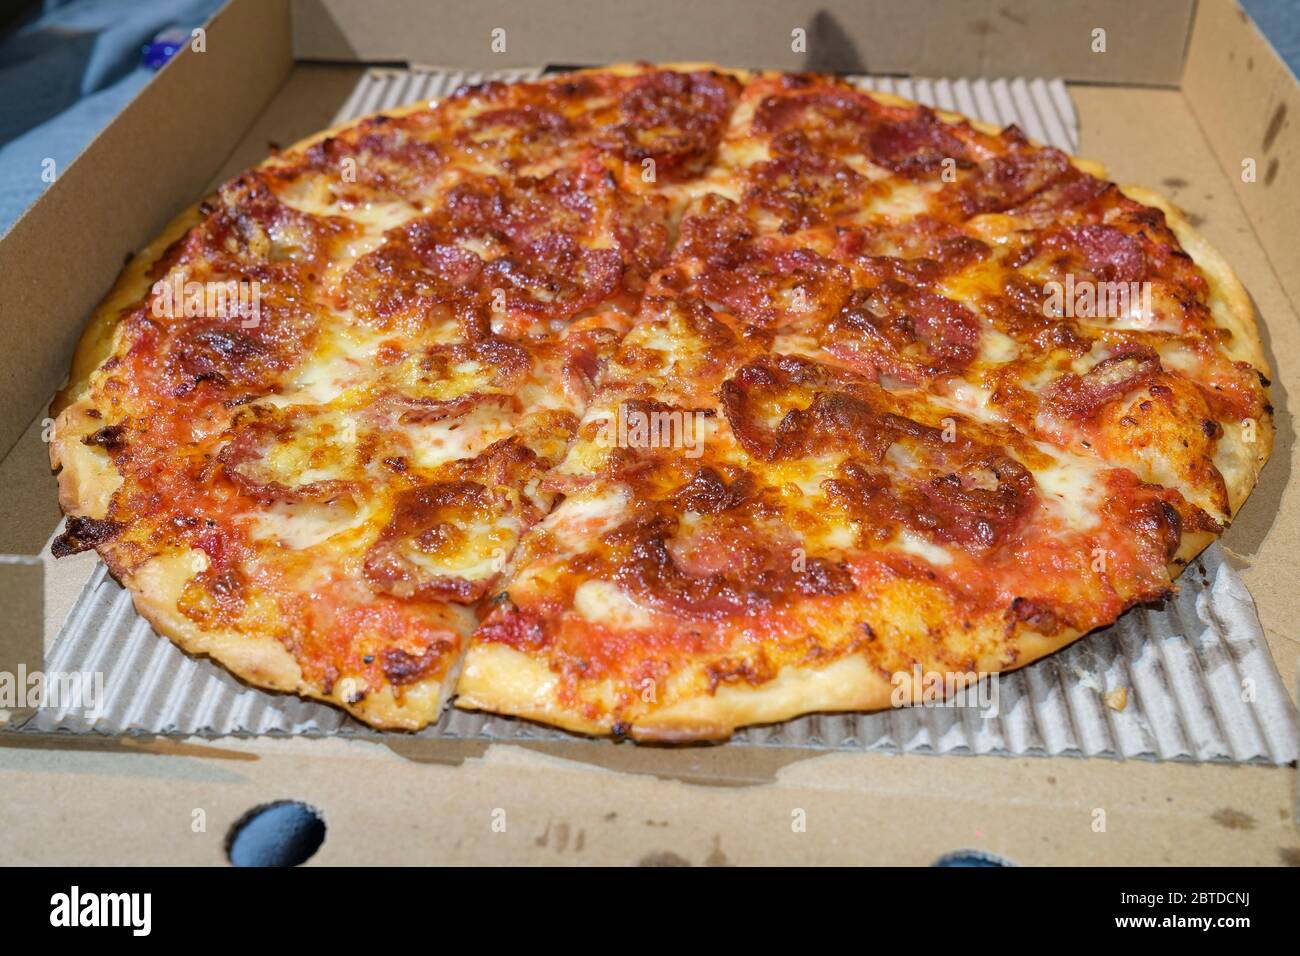 Greasy takeout Pepperoni pizza in carboard box Stock Photo